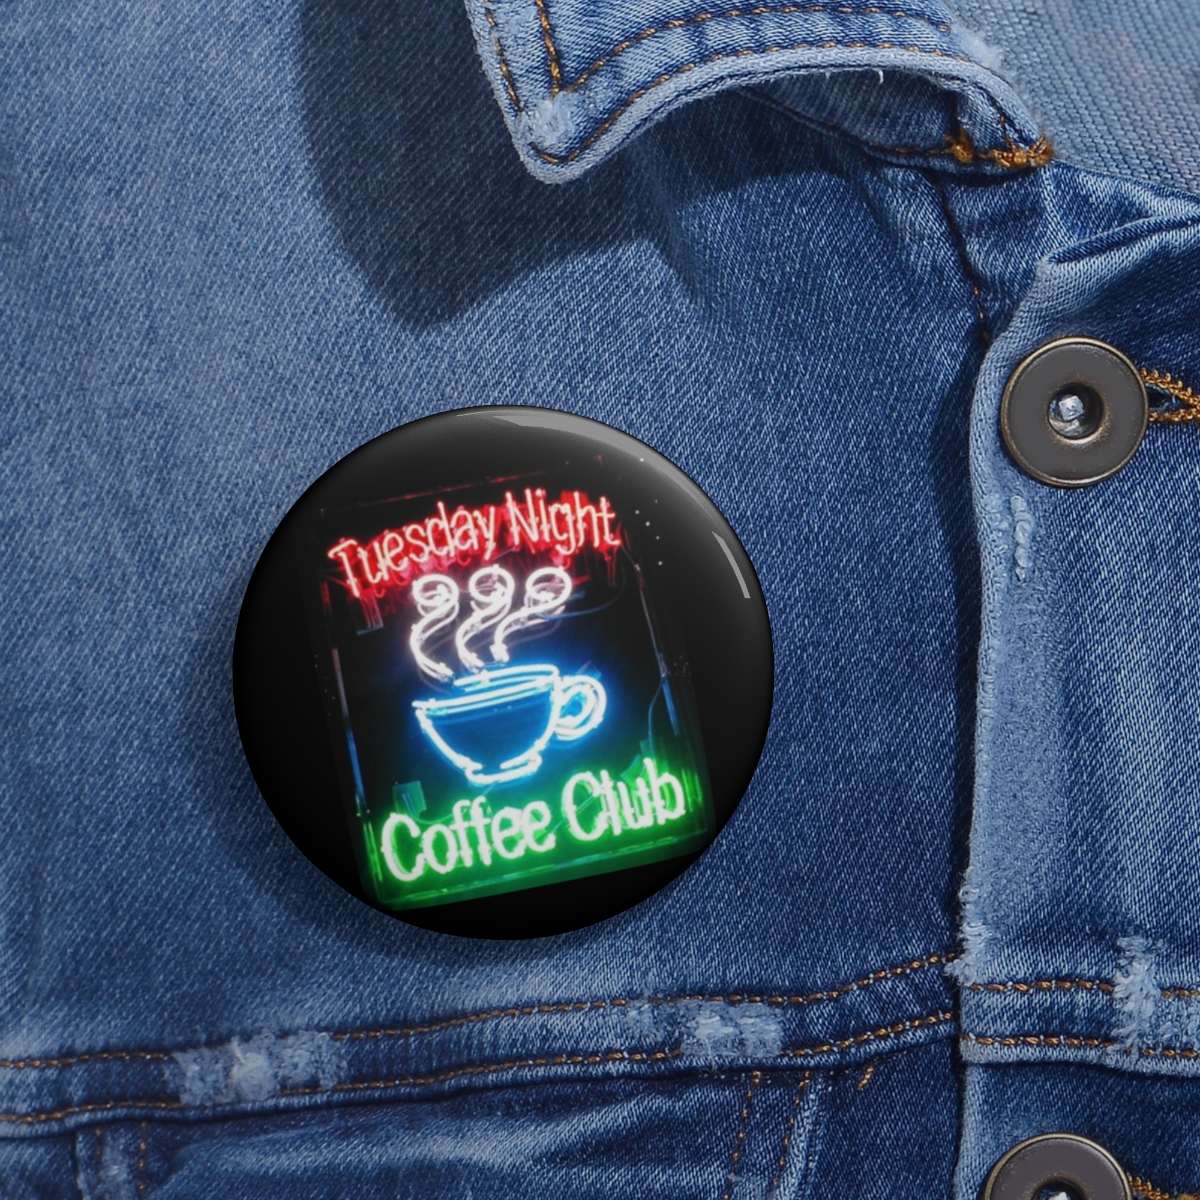 Custom Pin Buttons product thumbnail image